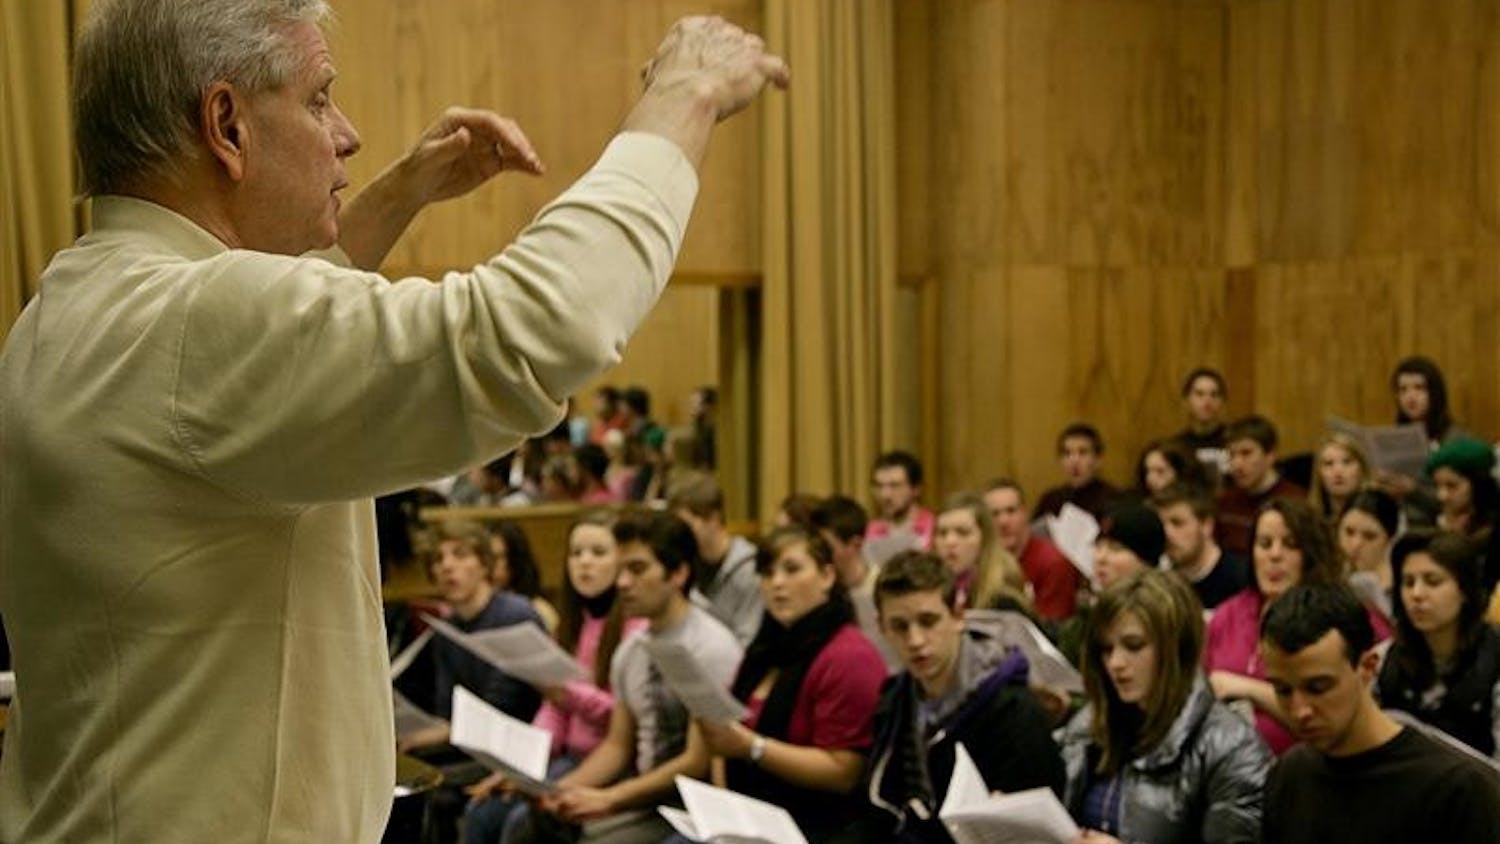 Director of the Singing Hoosiers Michael Schwartzkopf conducts the Singing Hoosiers during practice Wednesday afternoon at the Music Annex. The Singing Hoosiers were invited to sing during the Inauguration events of Barack Obama in Washington D.C. next week.